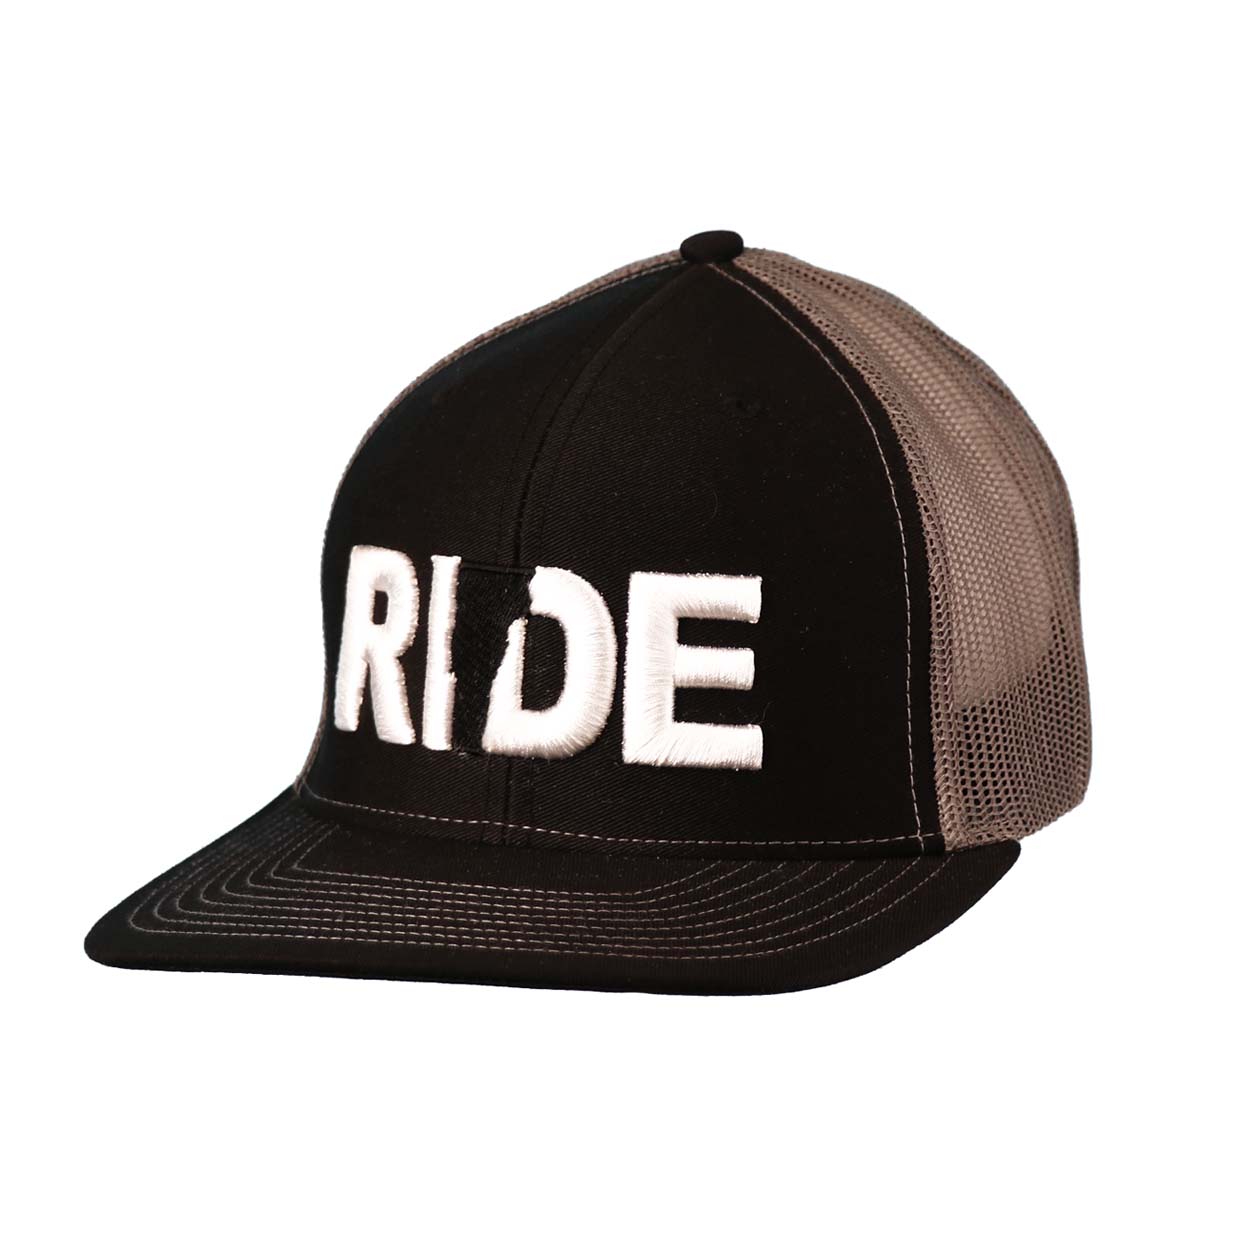 Ride Vermont Classic Pro 3D Puff Embroidered Snapback Trucker Hat Black/Gray